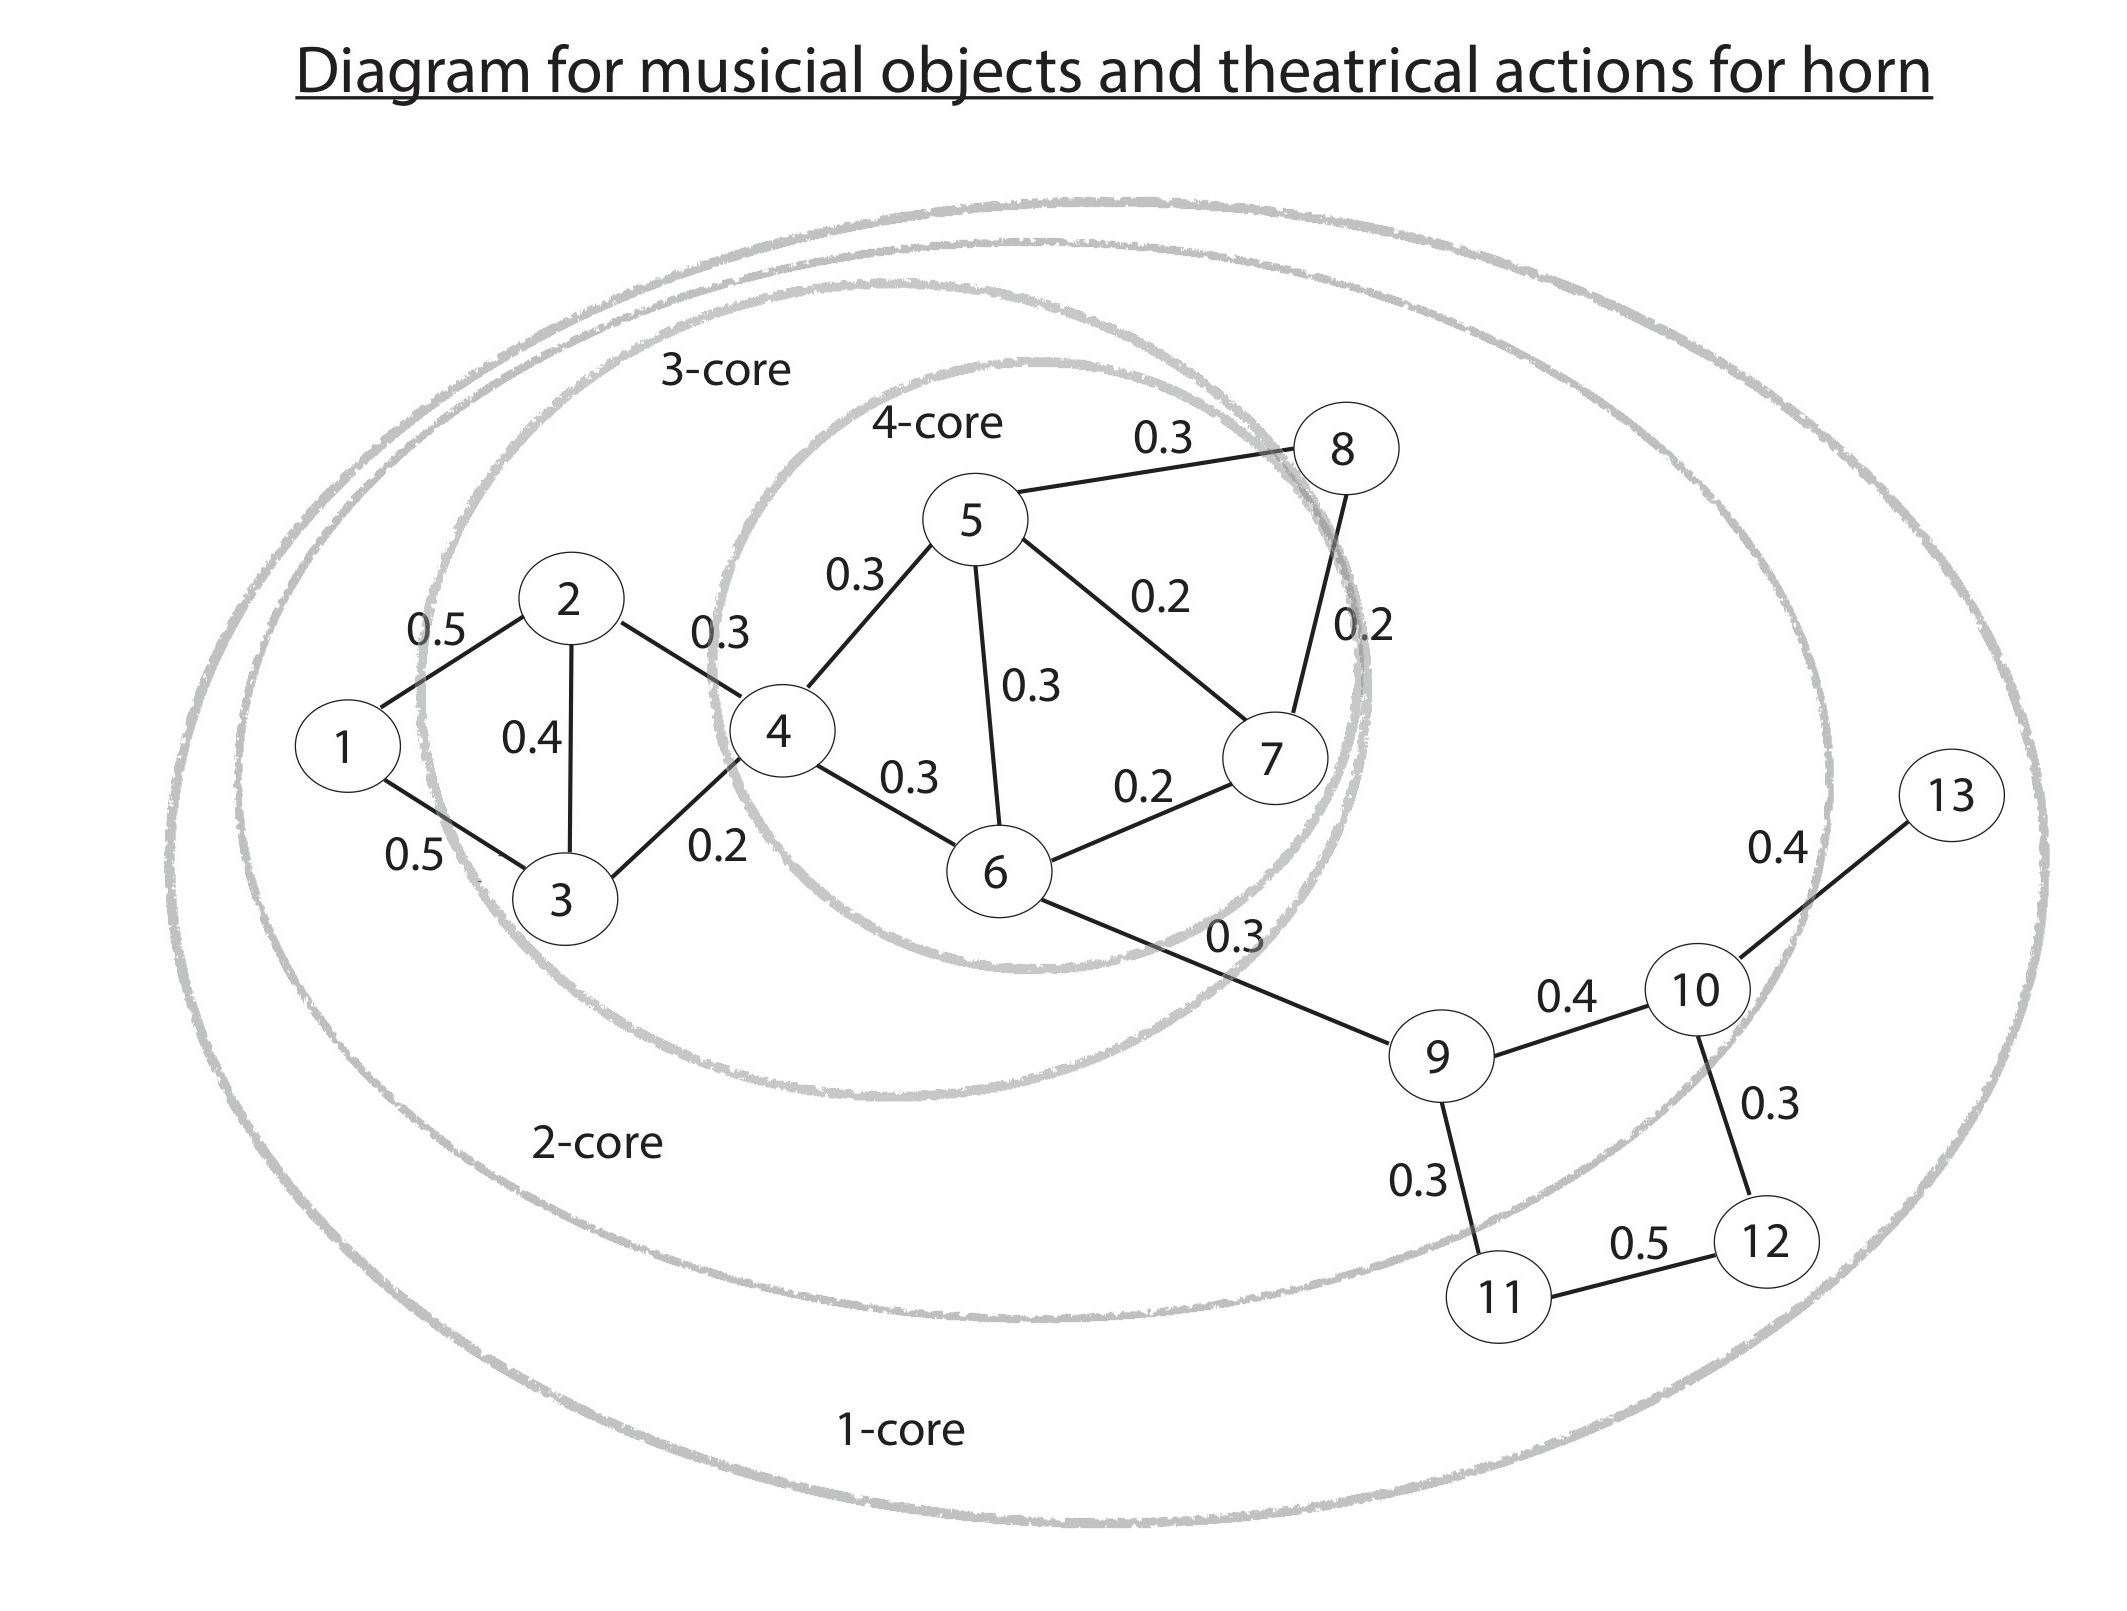 Diagrams for Objects - New possibilities